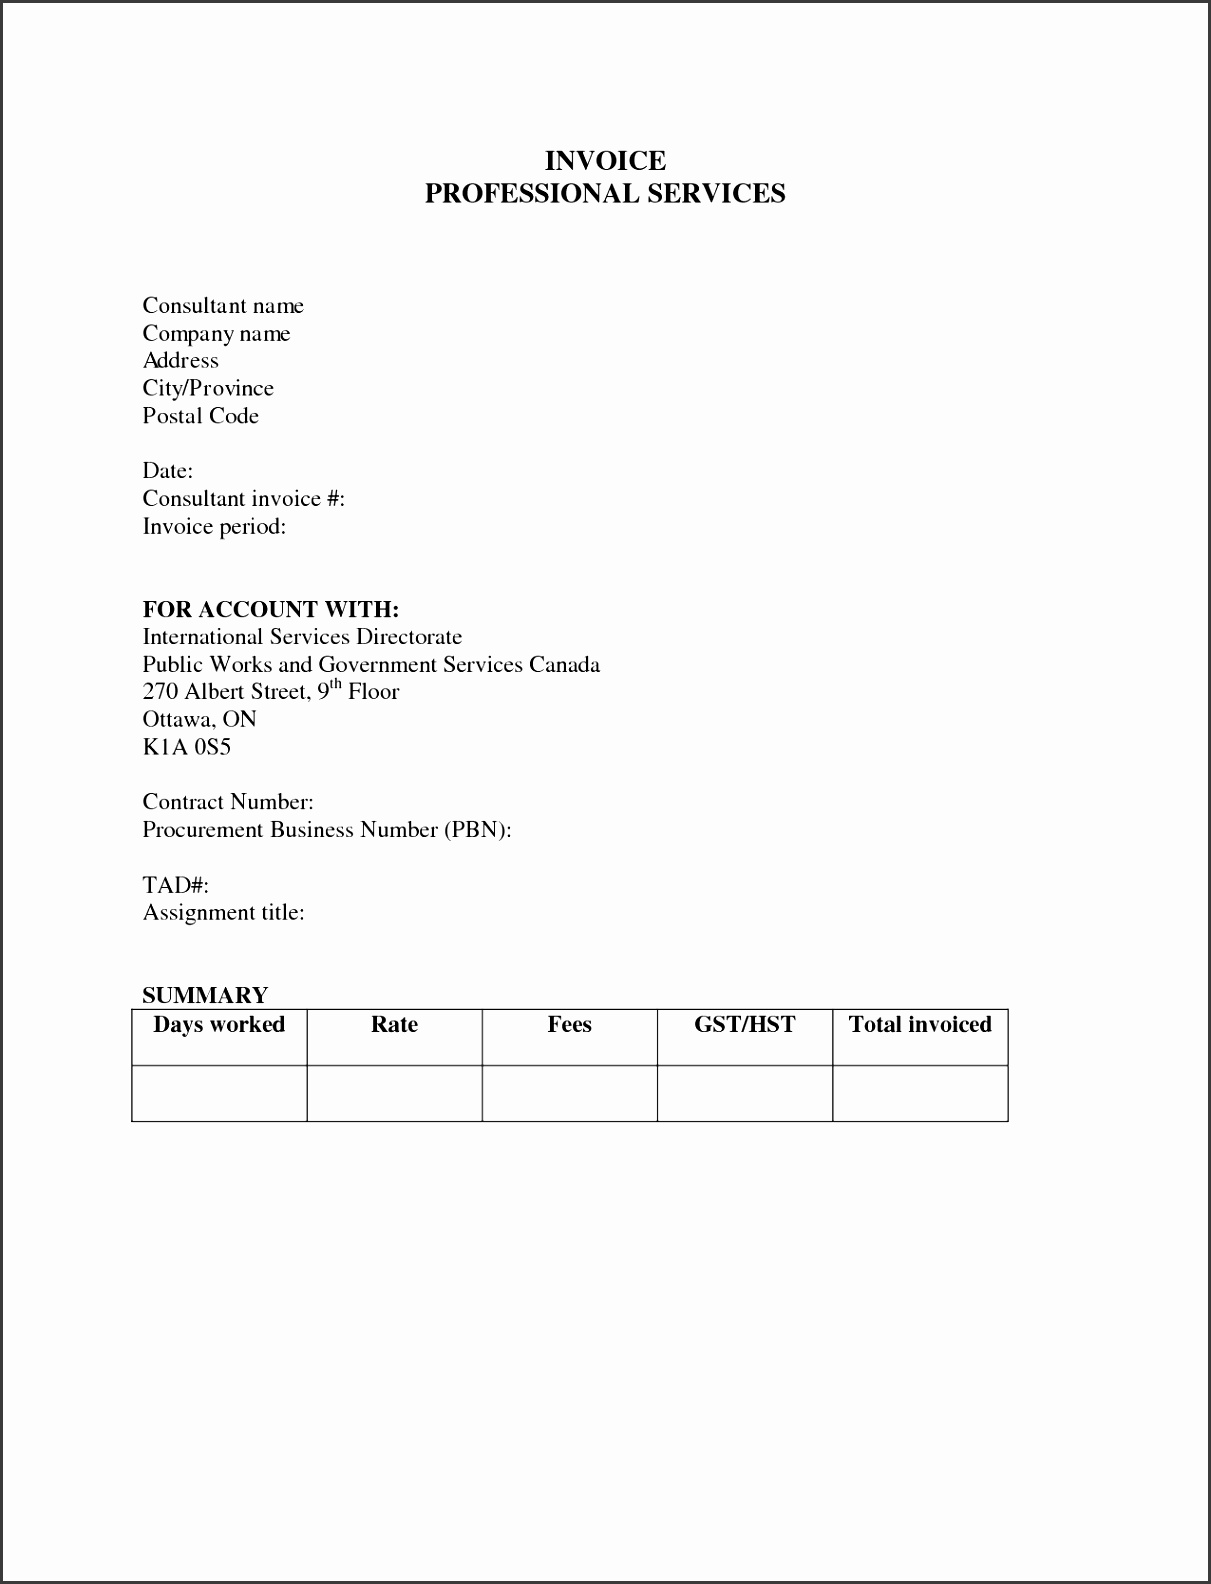 invoice format for professional services